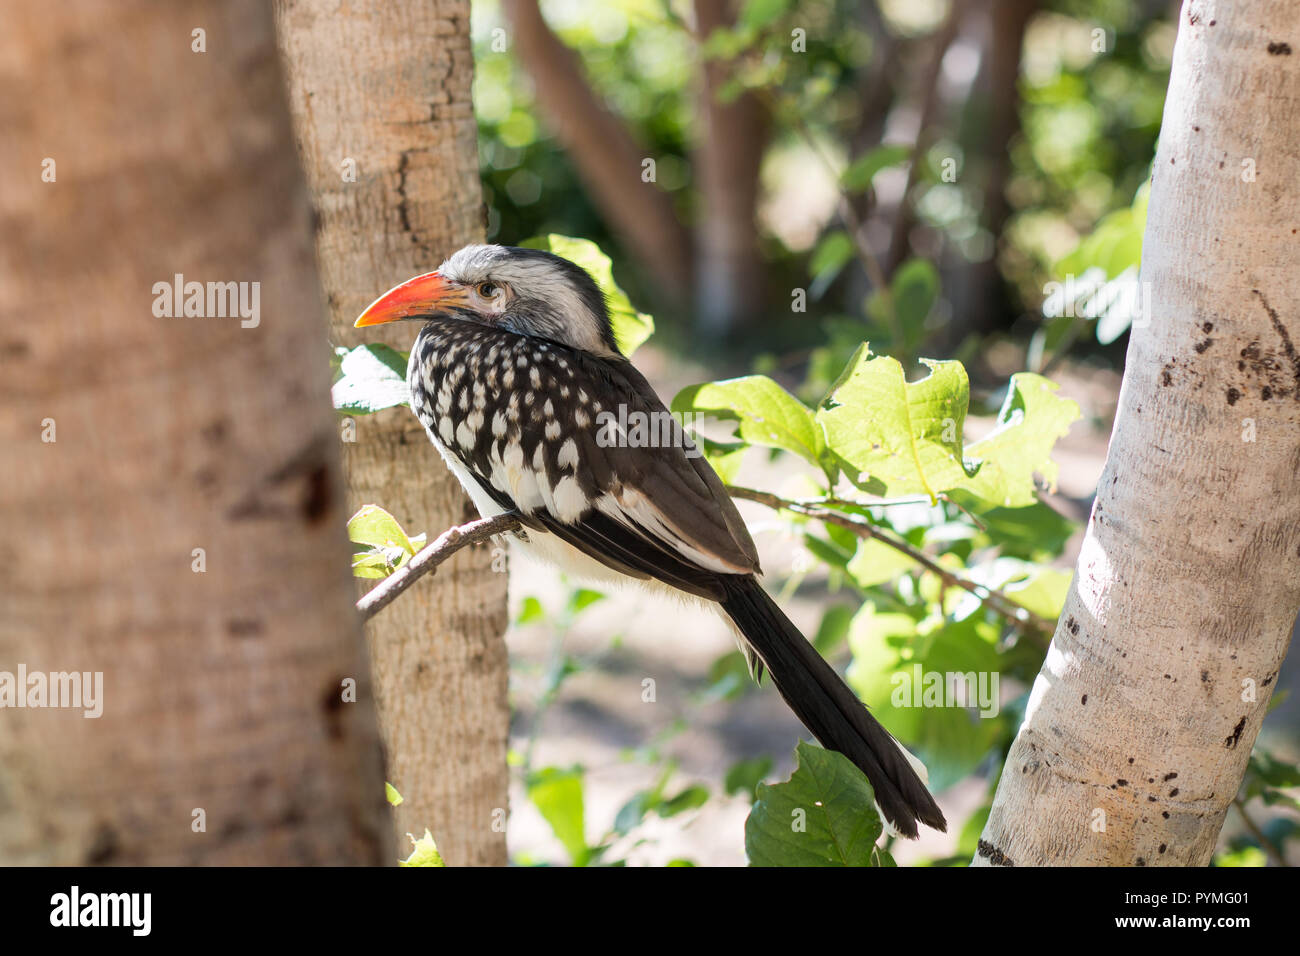 Southern Red-billed Hornbill juvinile perched in a tree closeup looking at the camera. Bird with white underparts, spotted wings and long red bill. Stock Photo